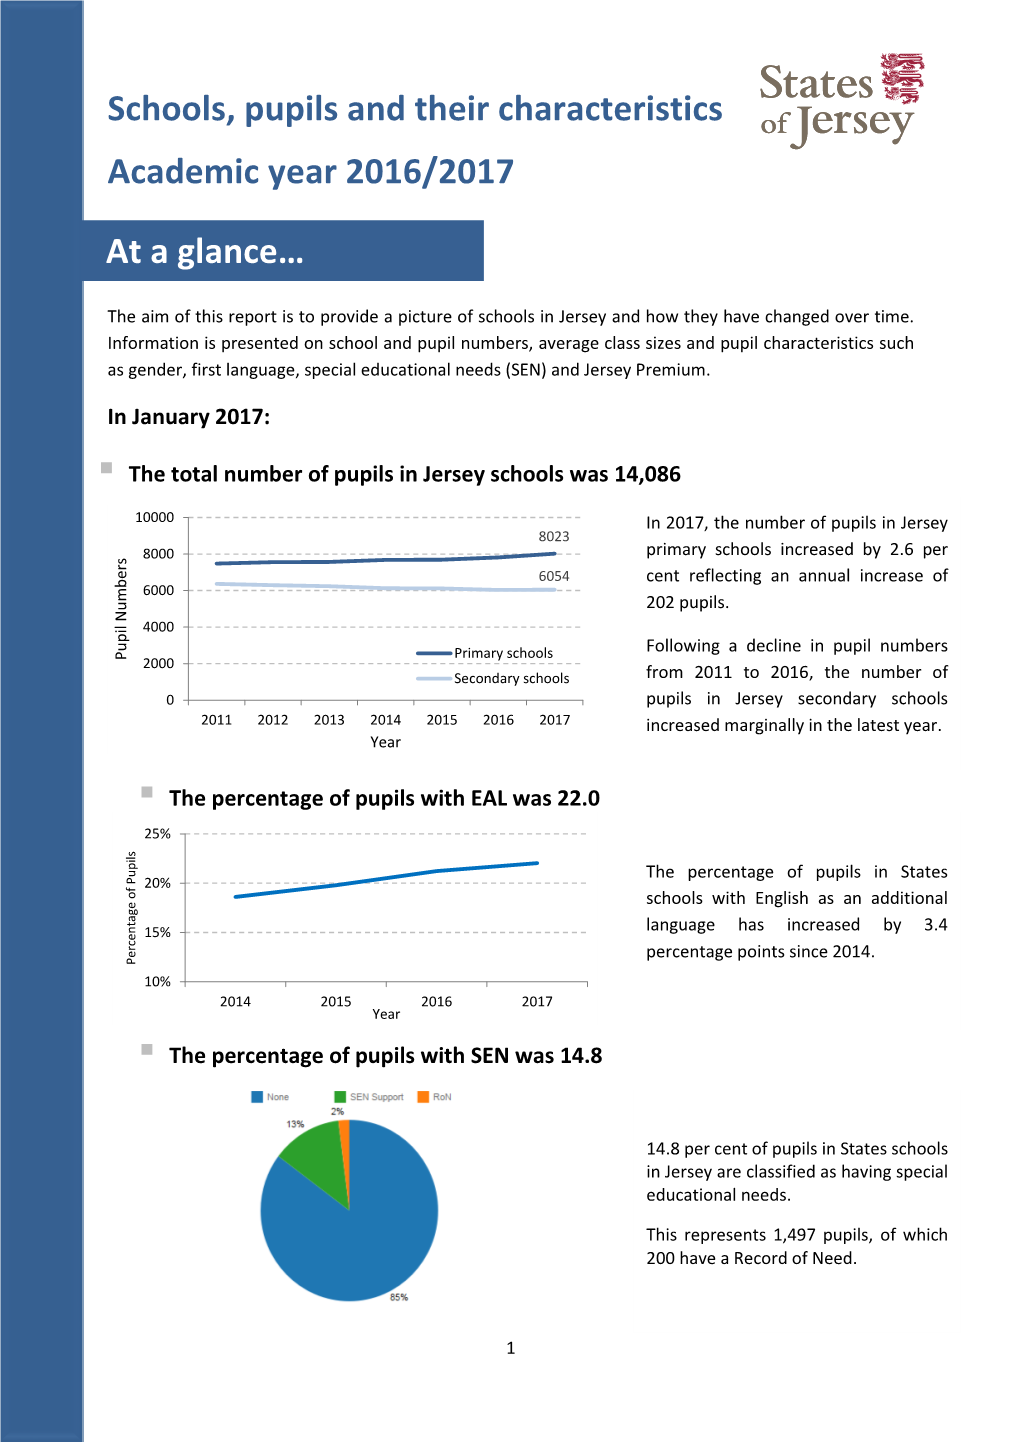 Schools, Pupils and Their Characteristics Academic Year 2016/2017 at a Glance…